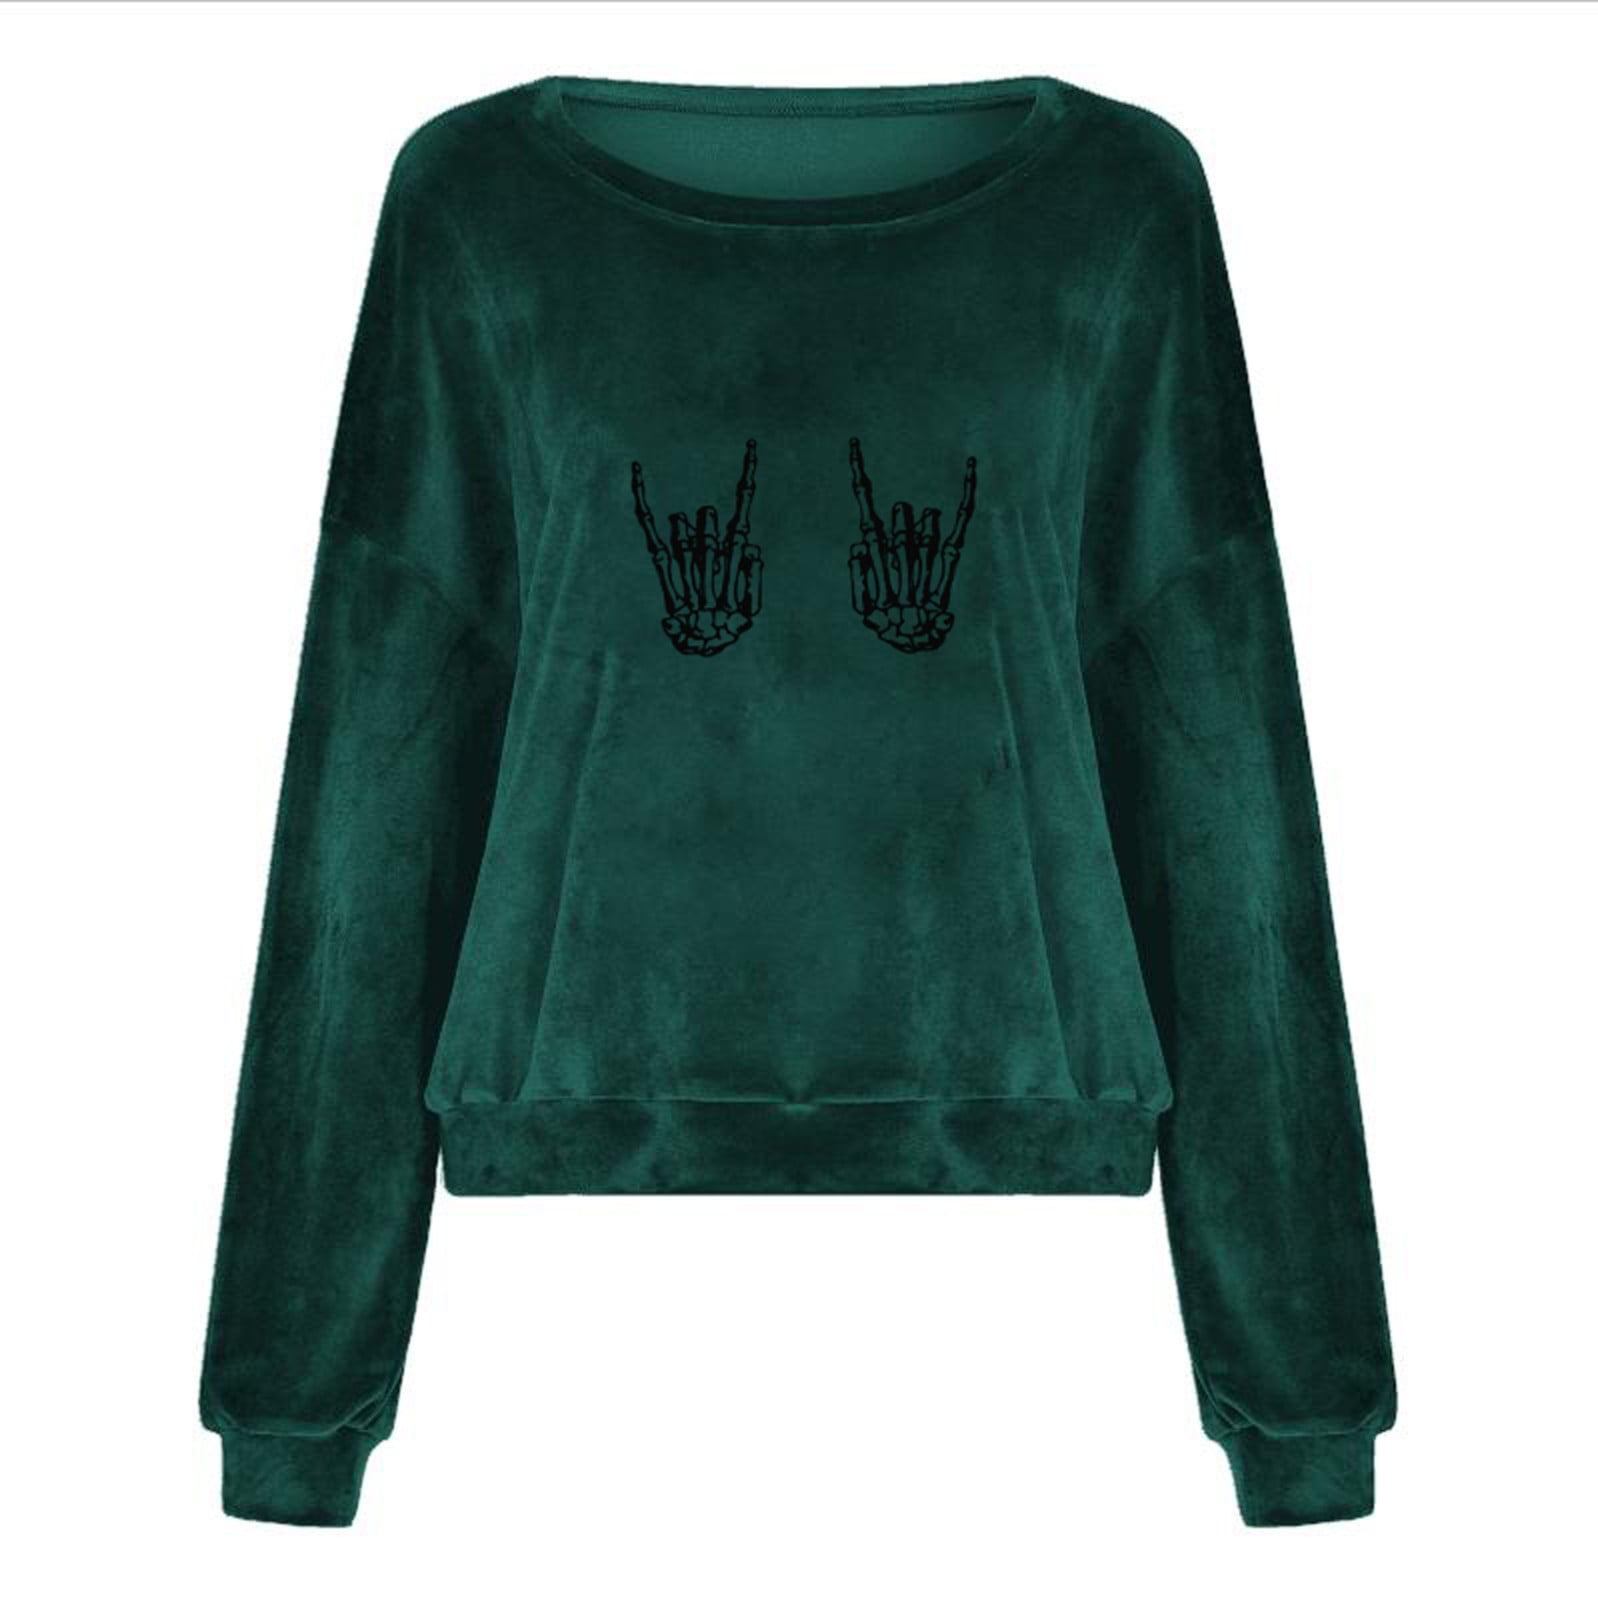 Oversized Sweatshirt Hoodies for Women Casual Loose Pullover Graphic ...